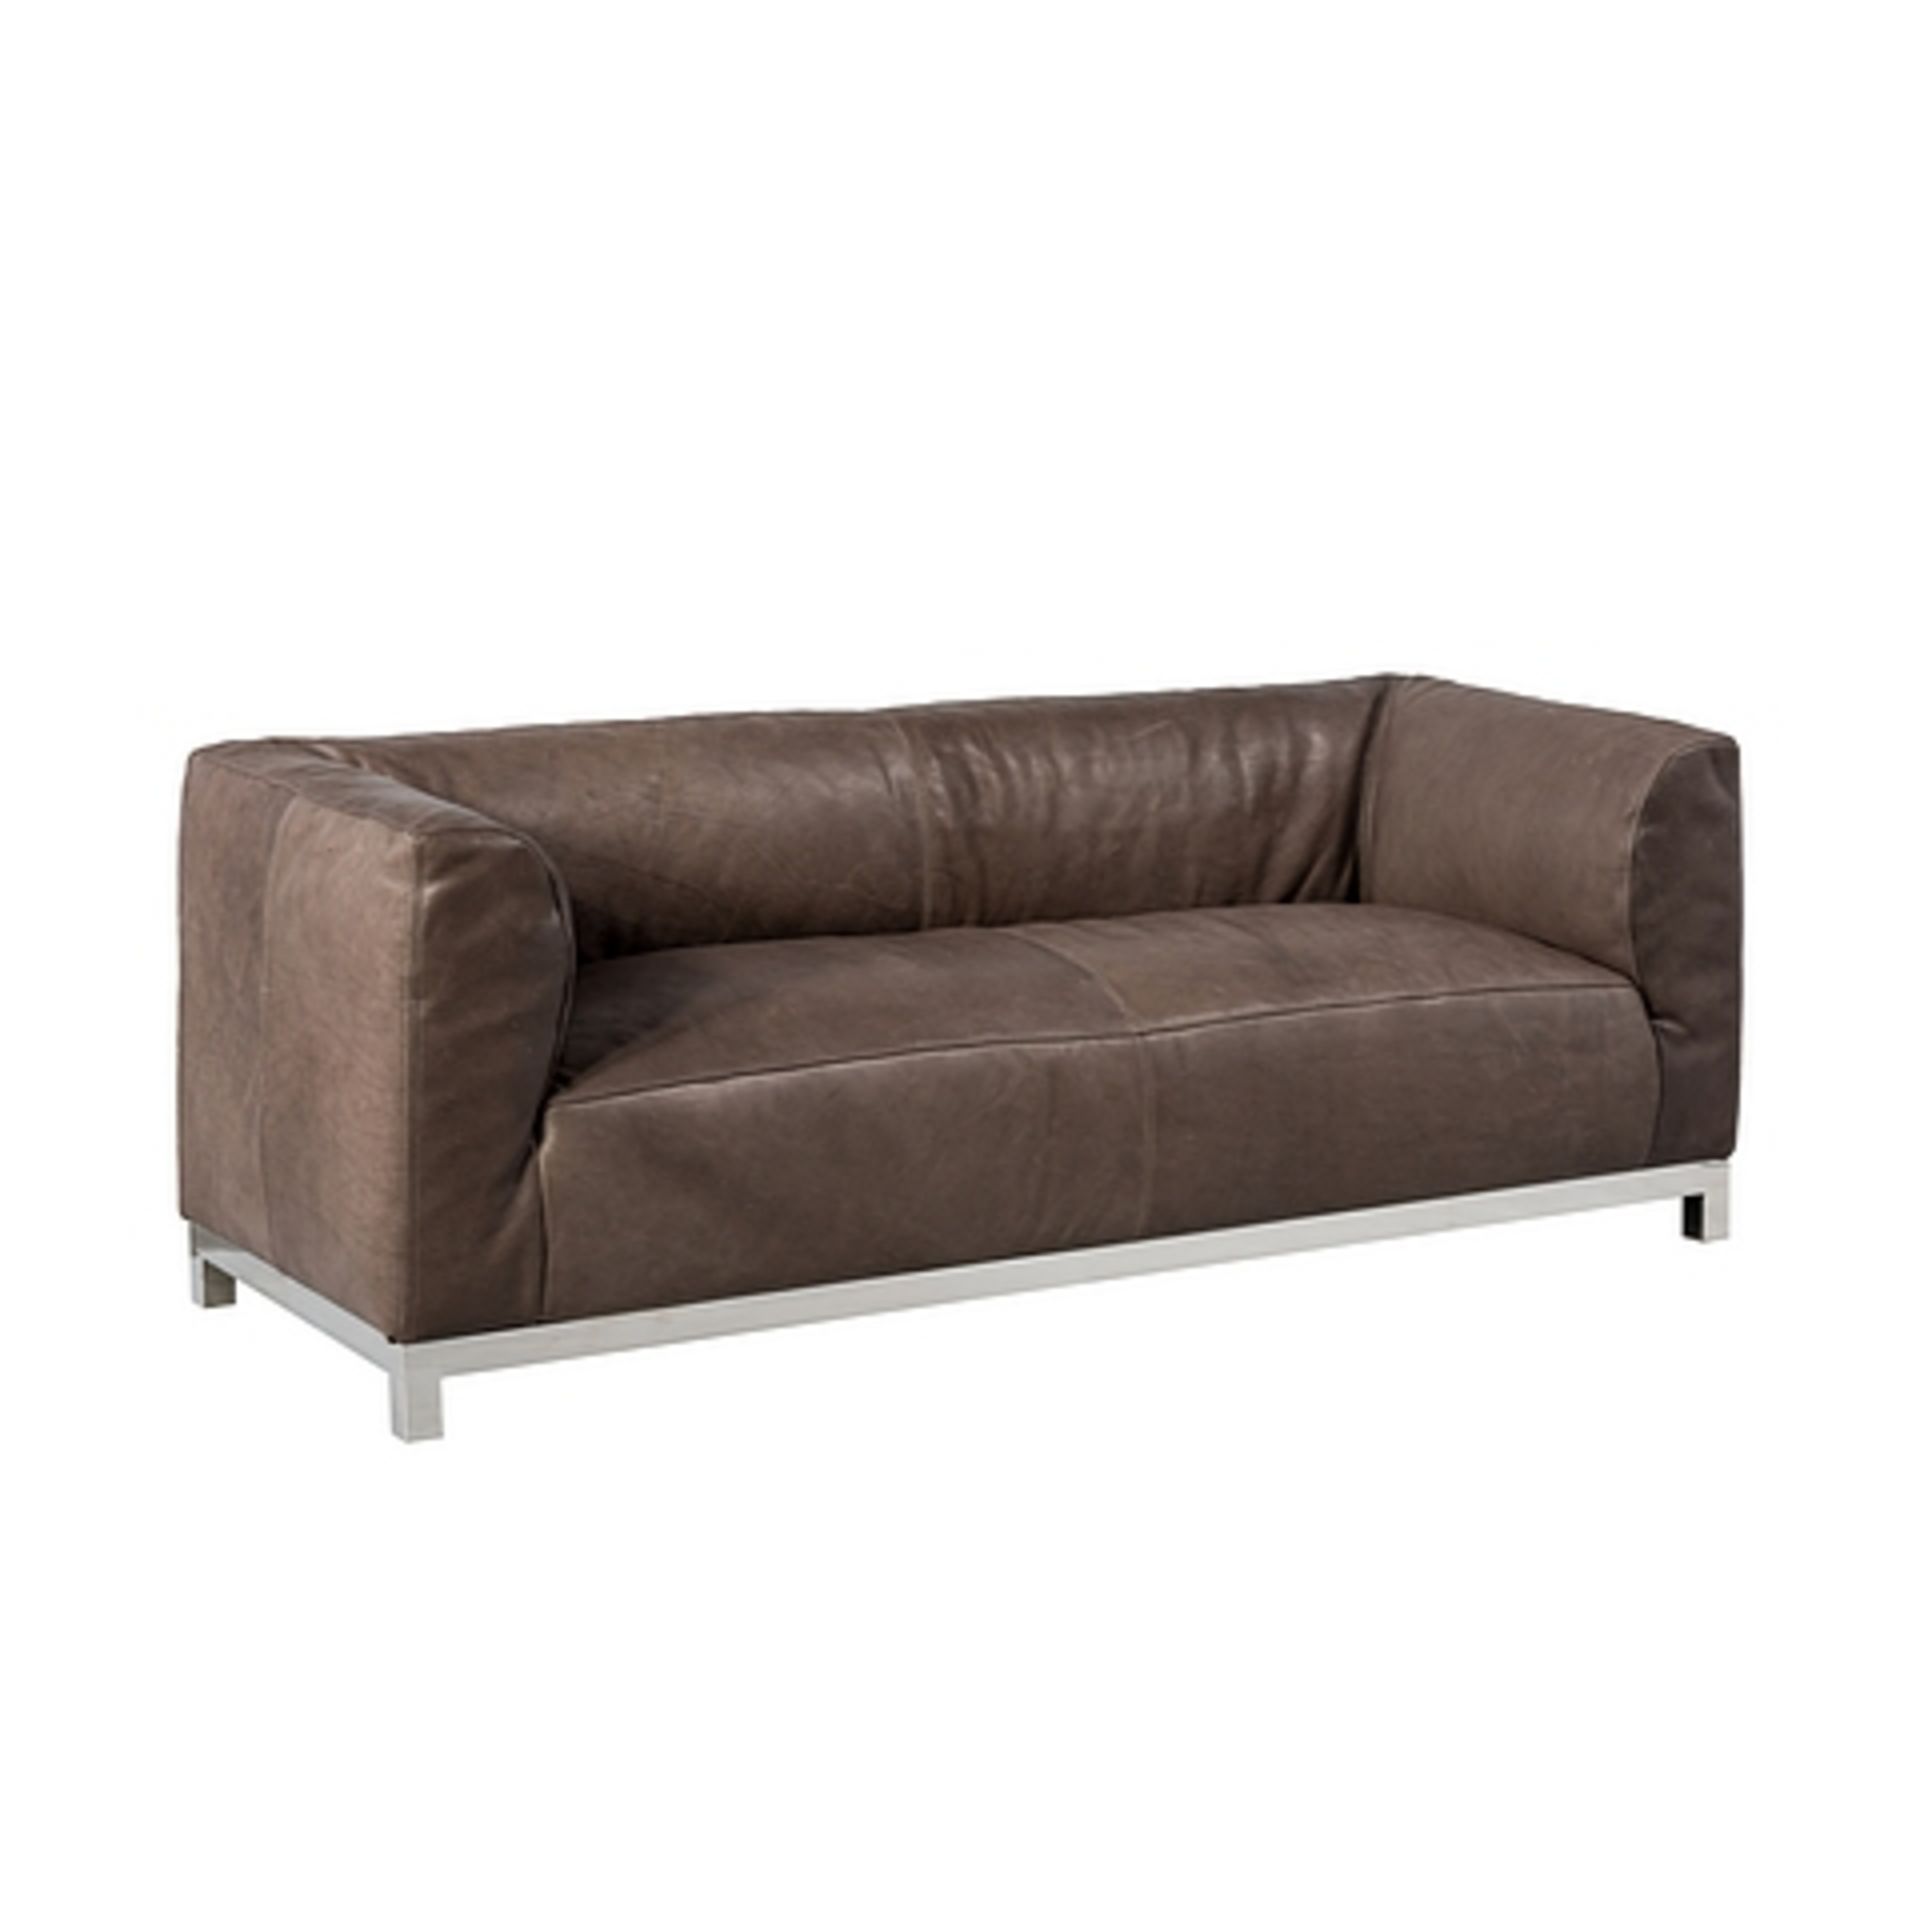 Zenith Medium Sofa 2 Seater Sioux Black And Shiny Steel 152x76.5x65cm RRP £ 3099